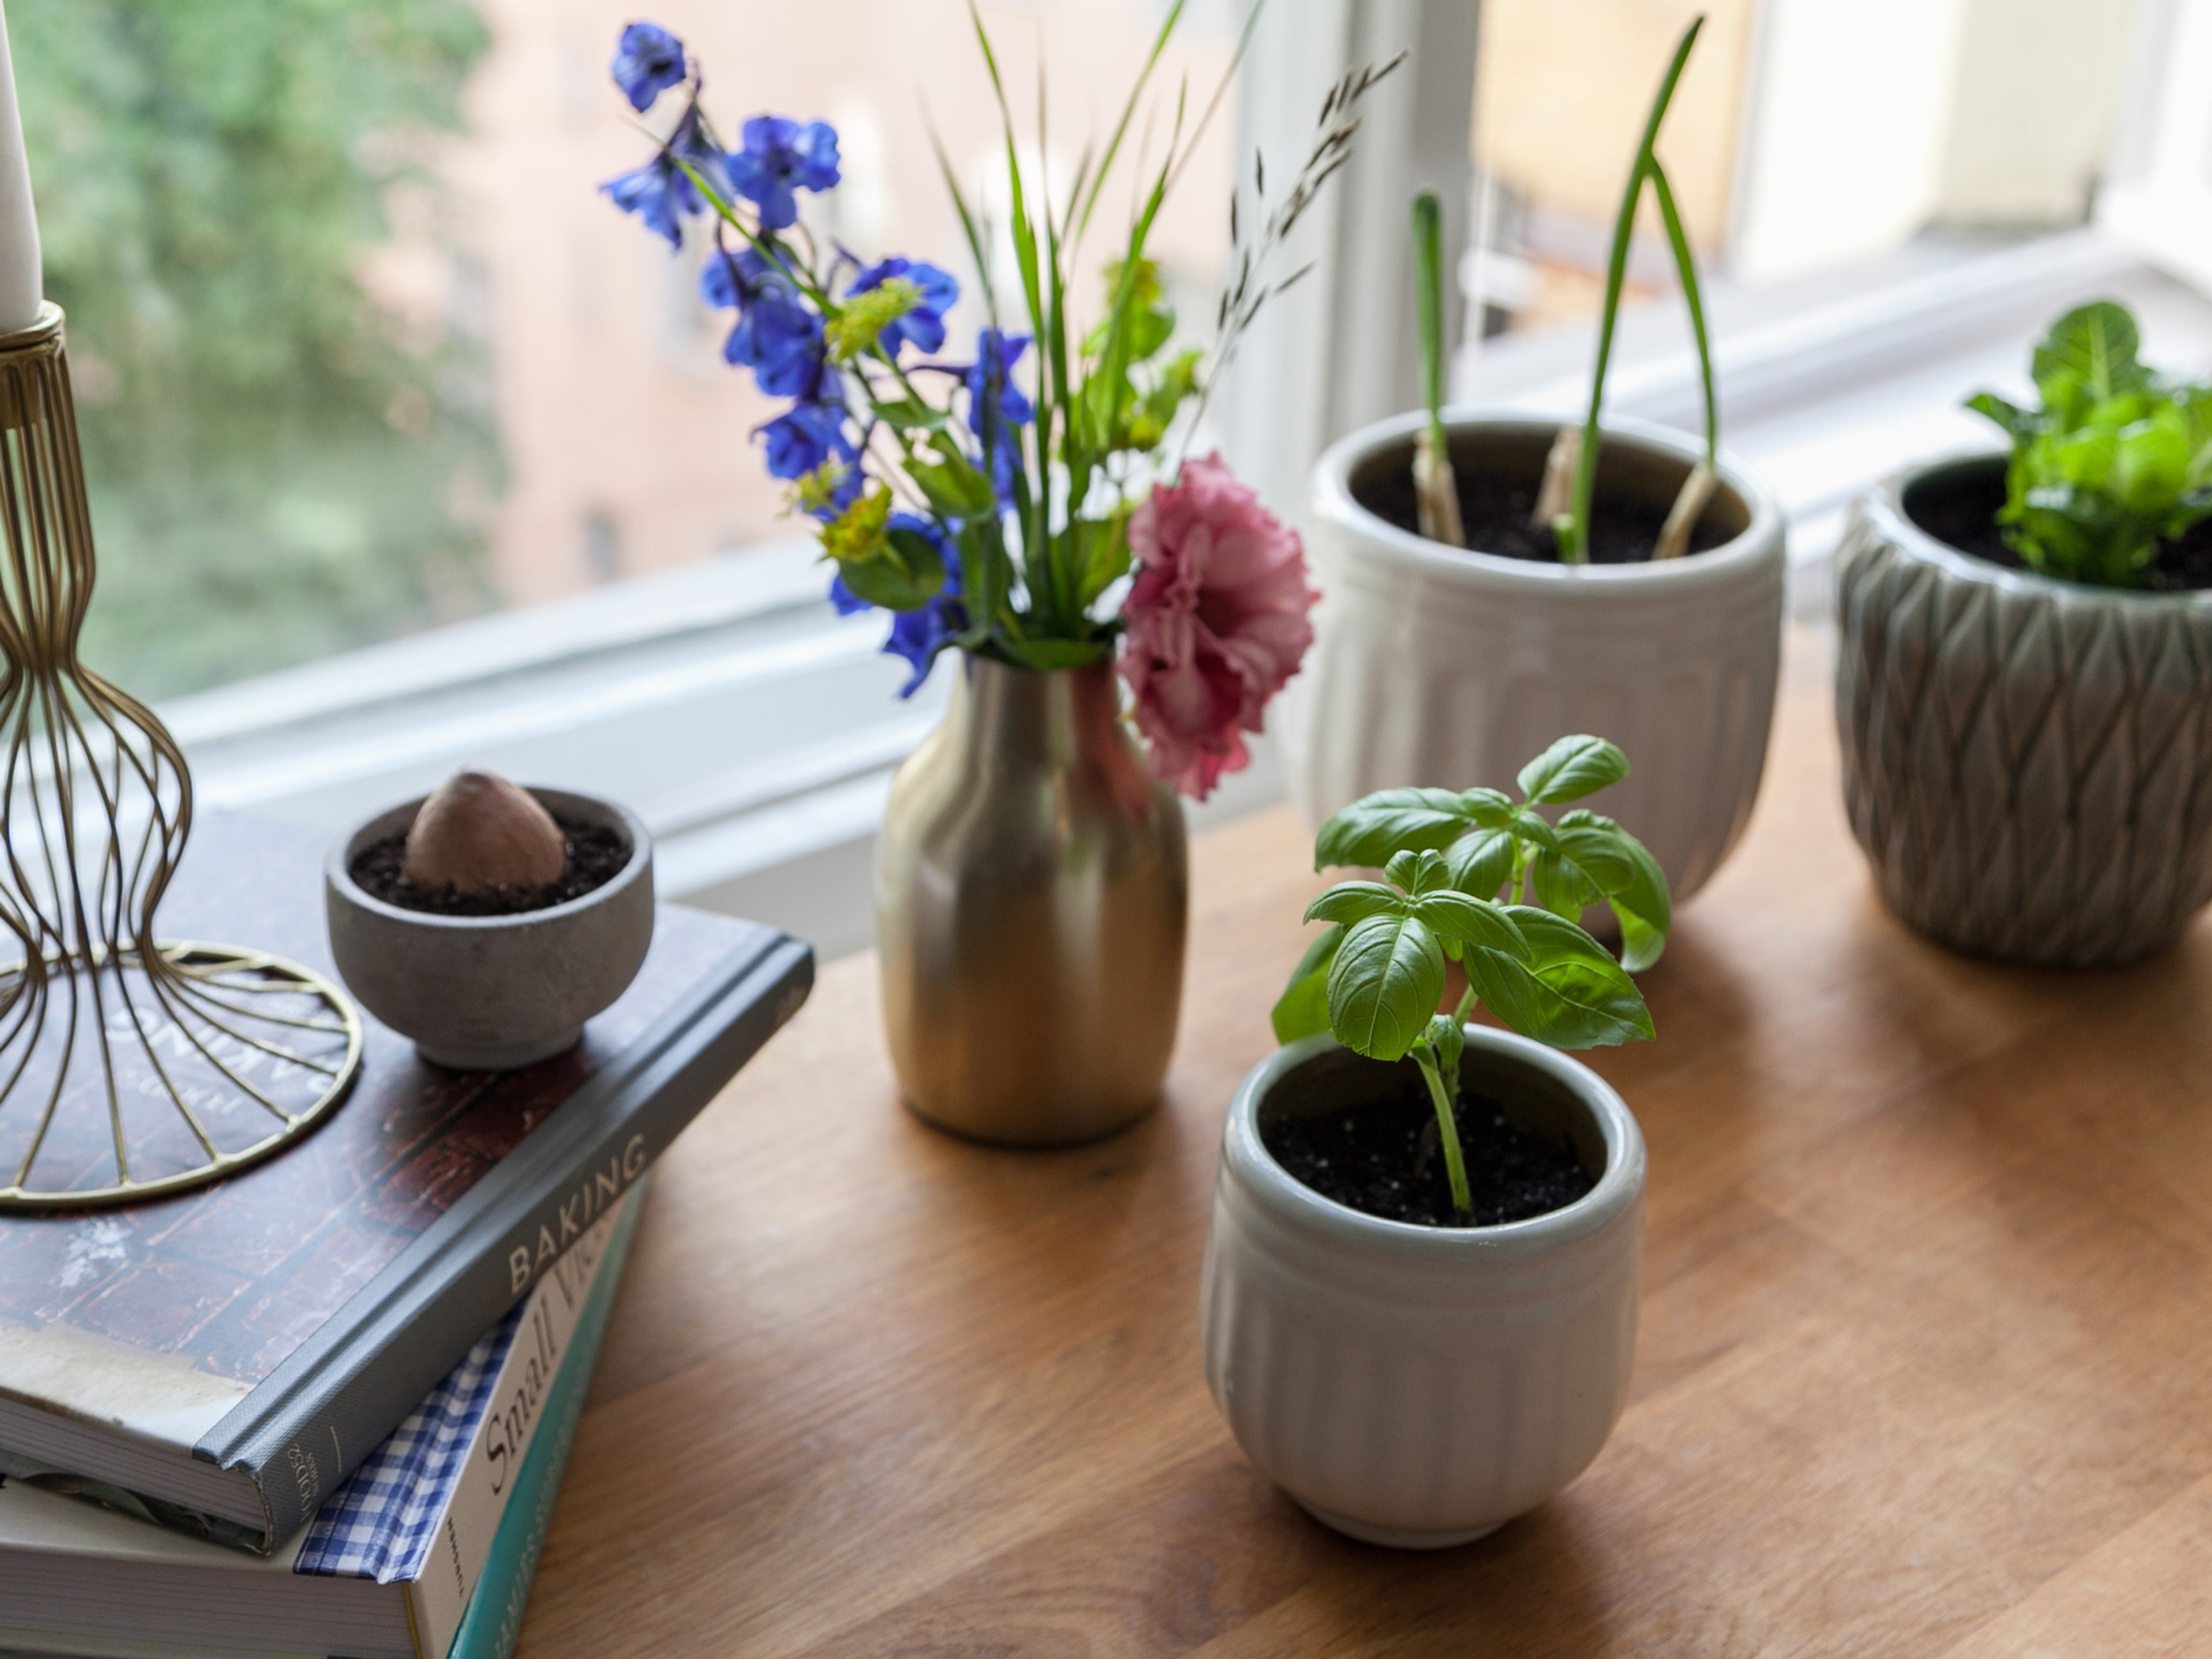 How to Regrow Herbs and Vegetables in the Kitchen